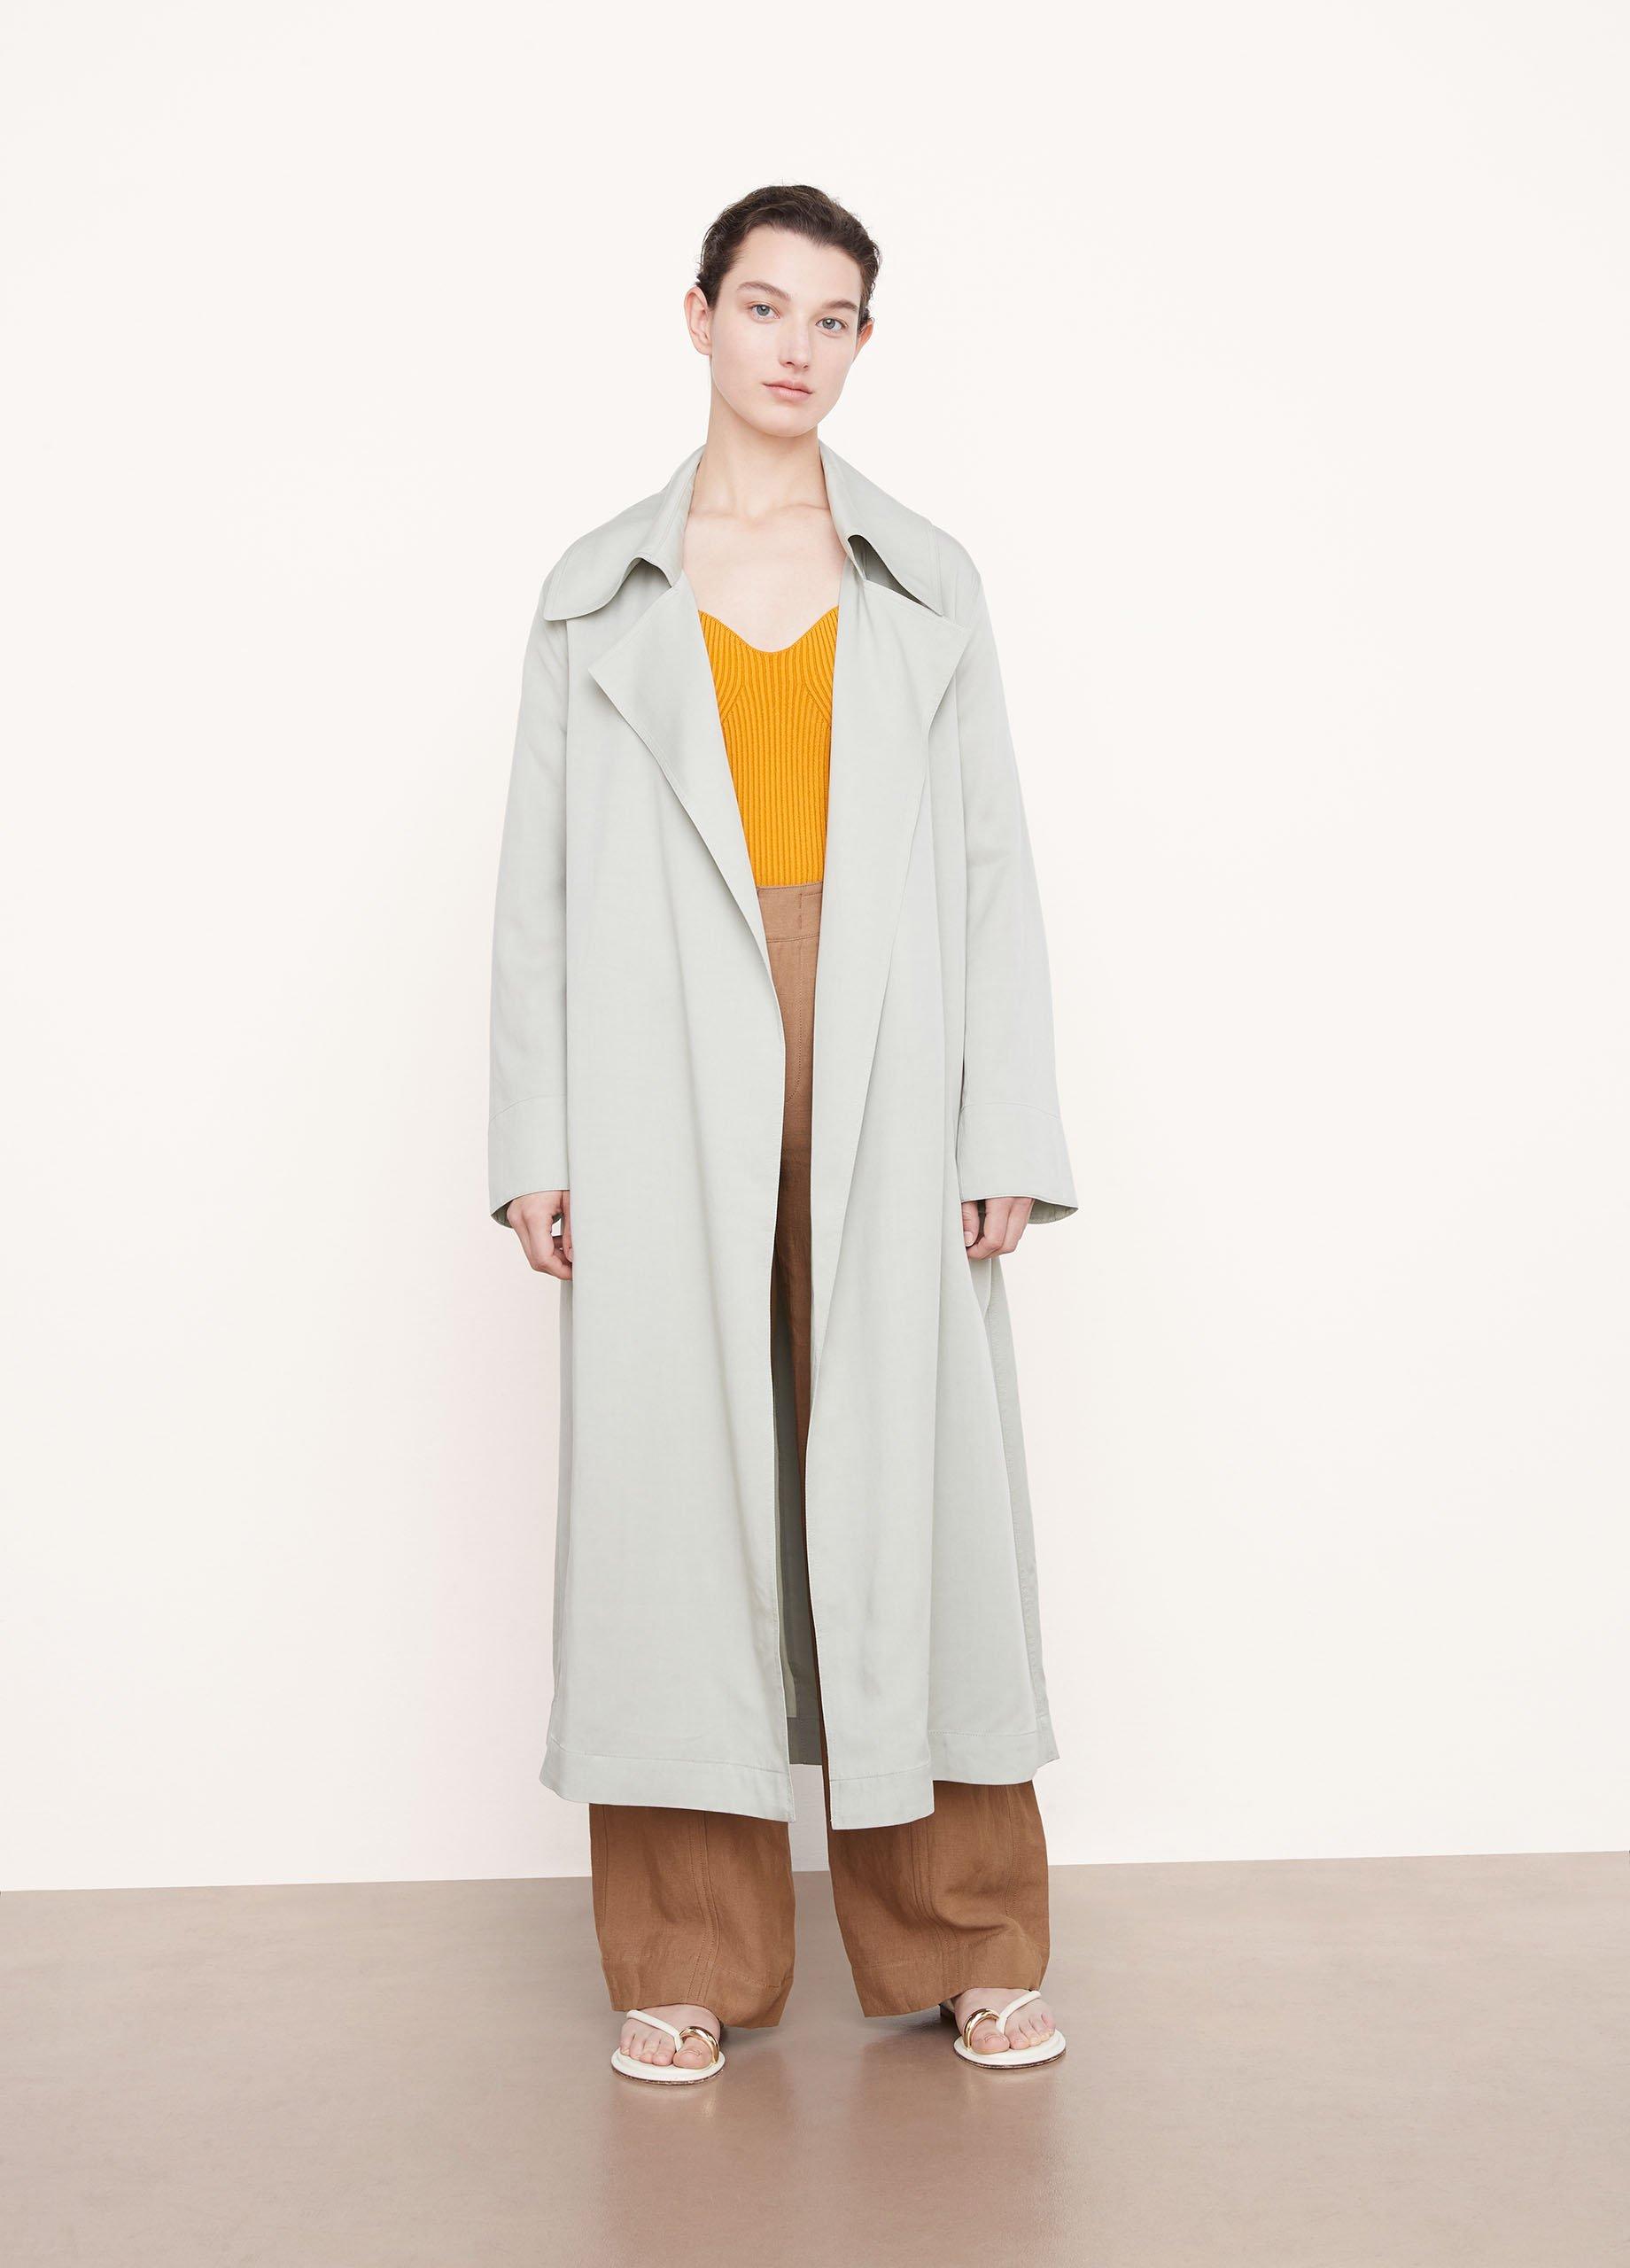 Maladroit opslag wasmiddel Drapey Belted Coat in Coats | Vince